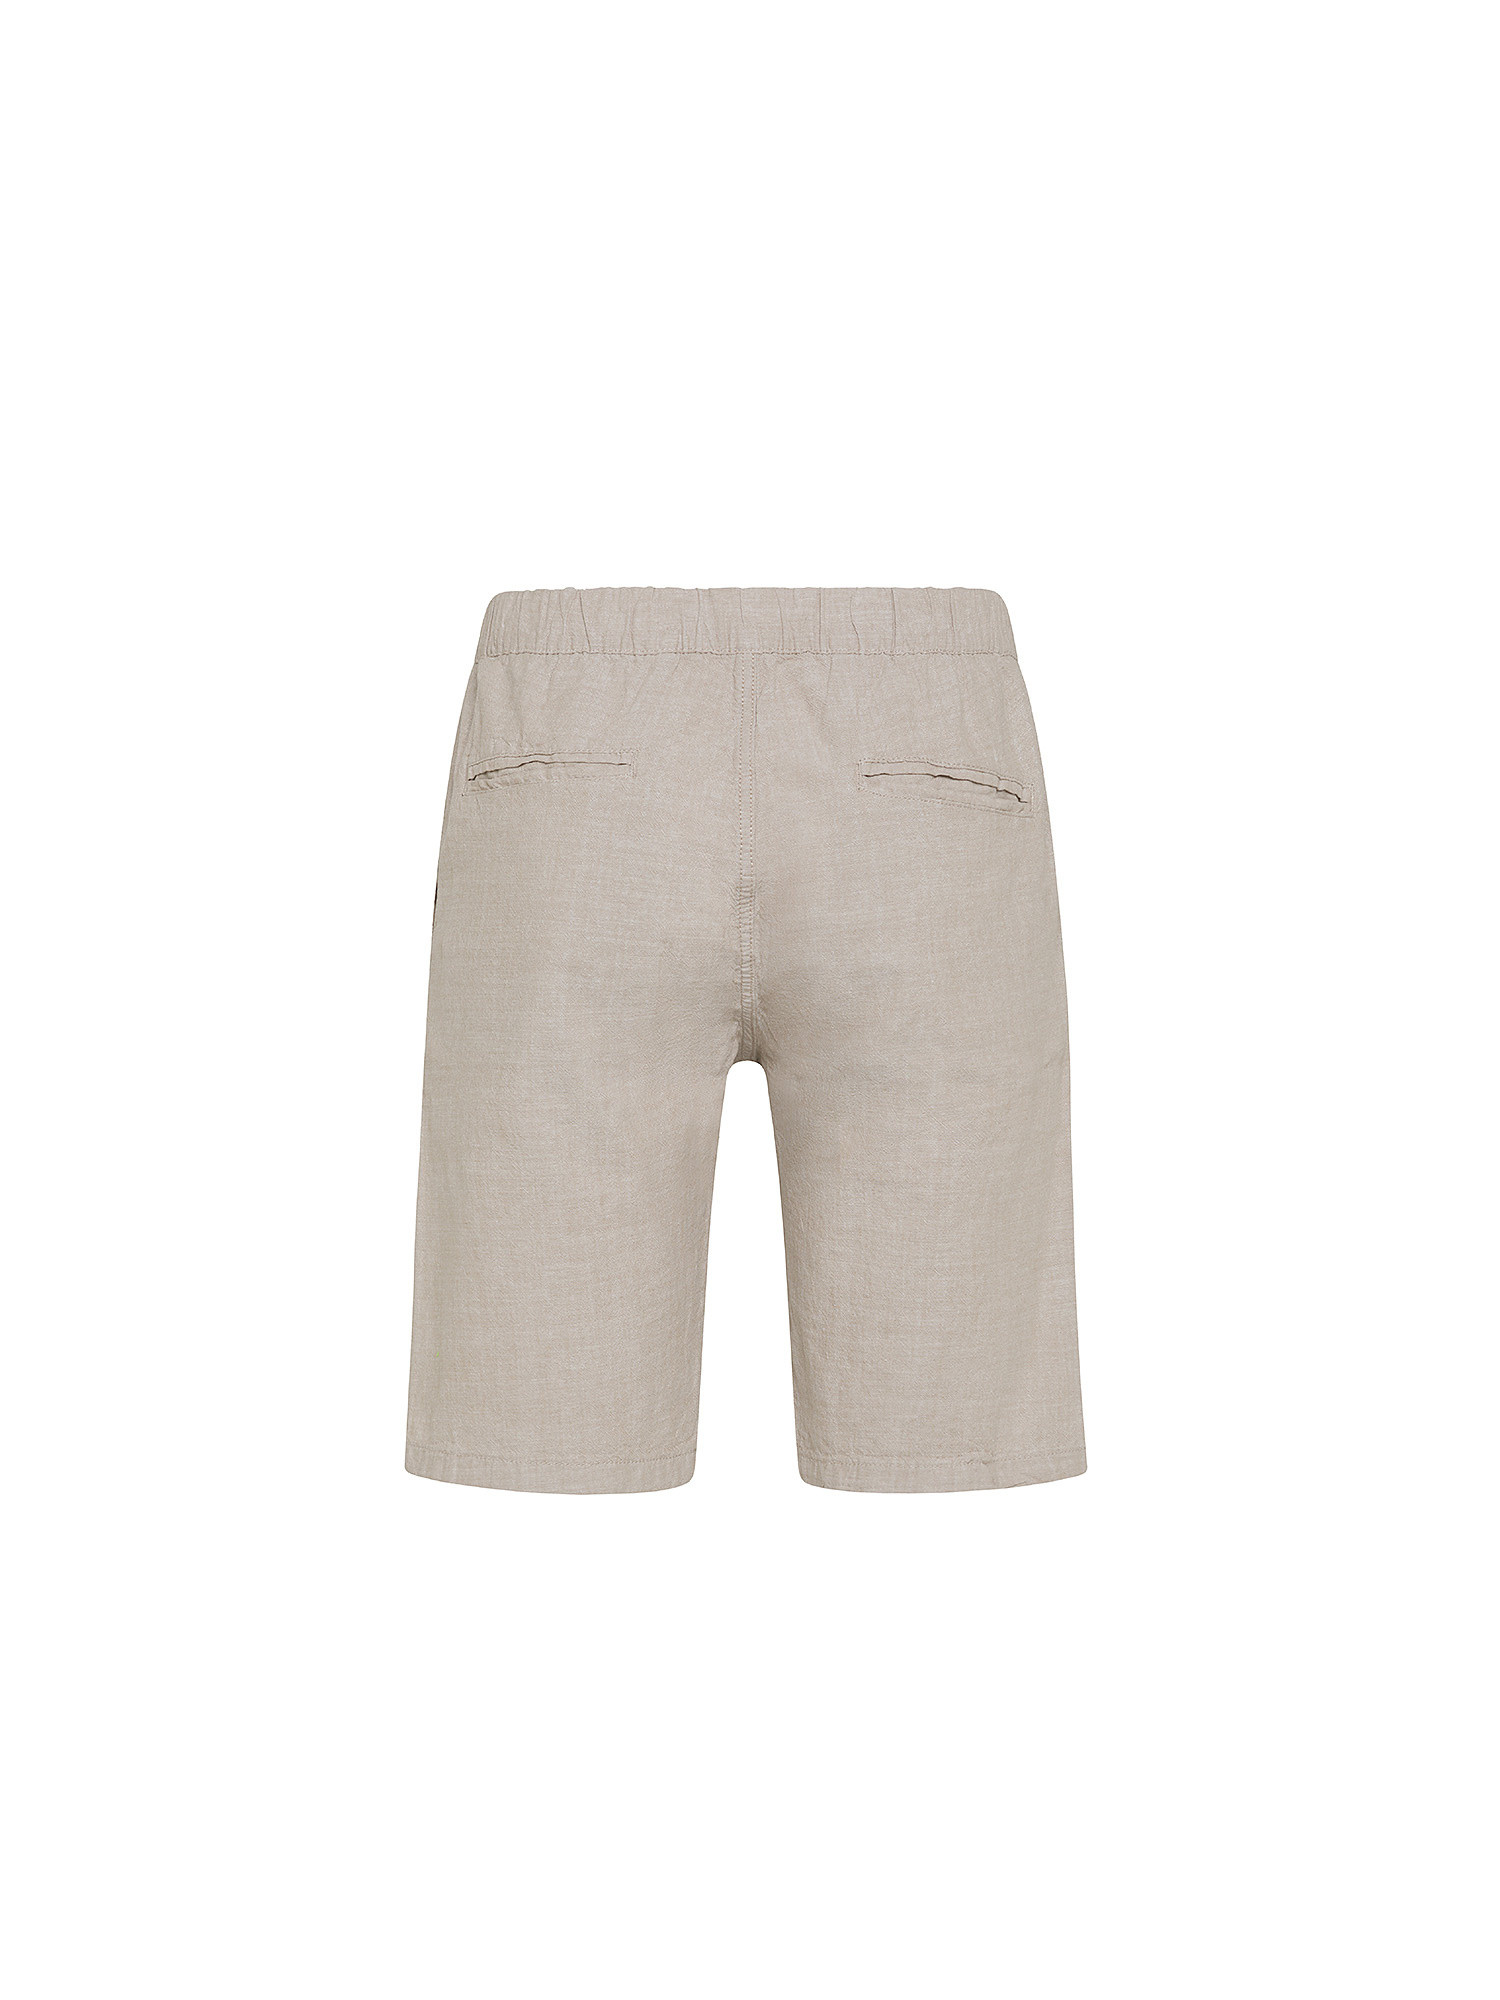 JCT - Chino bermuda in pure cotton with laces, Sand, large image number 1